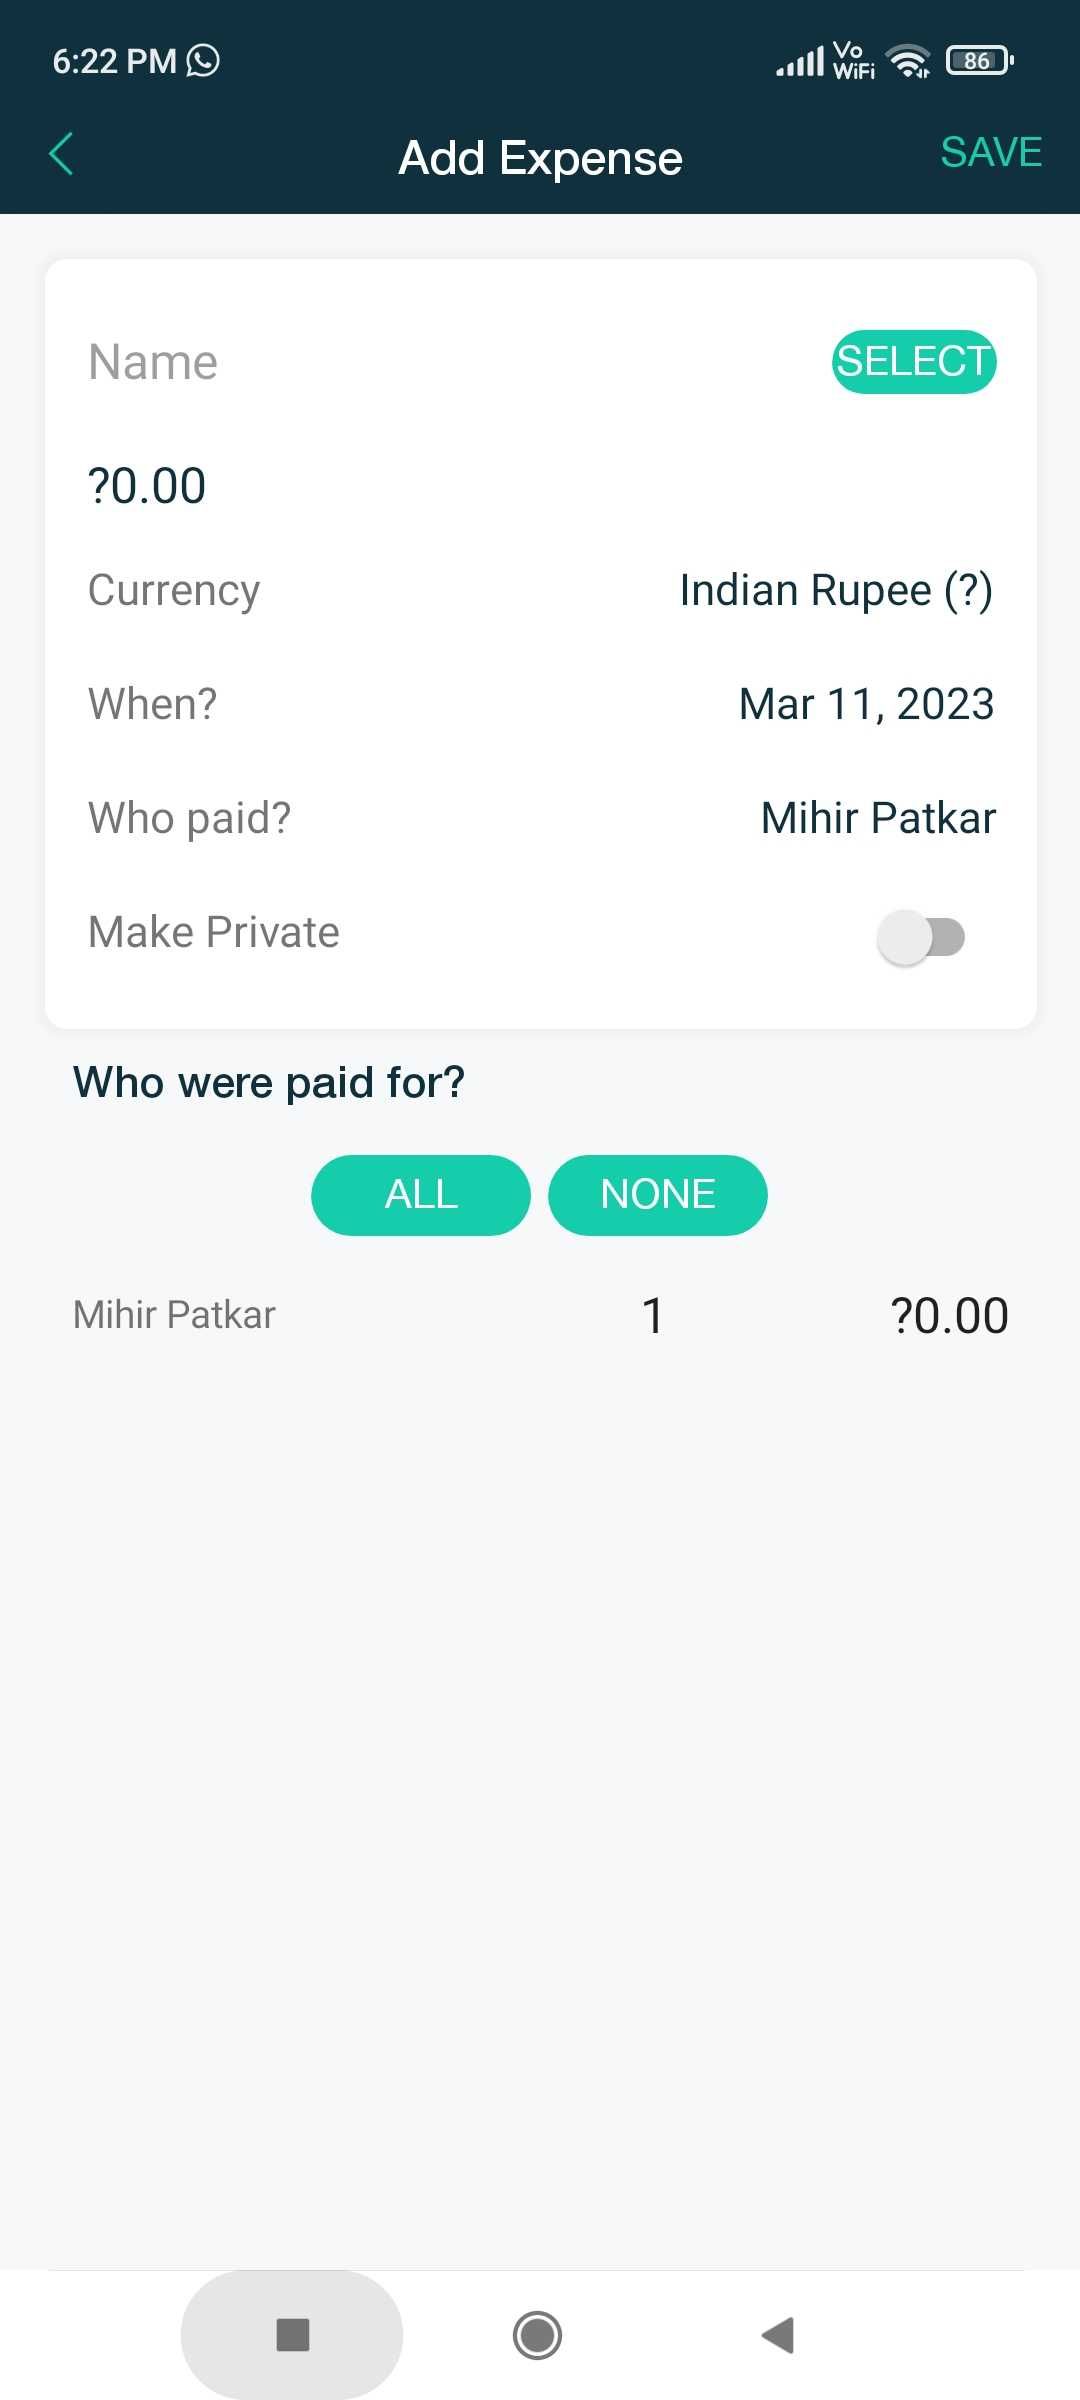 The built-in expense tracker in Mobili is a comprehensive way to track and split travel expenses with your group